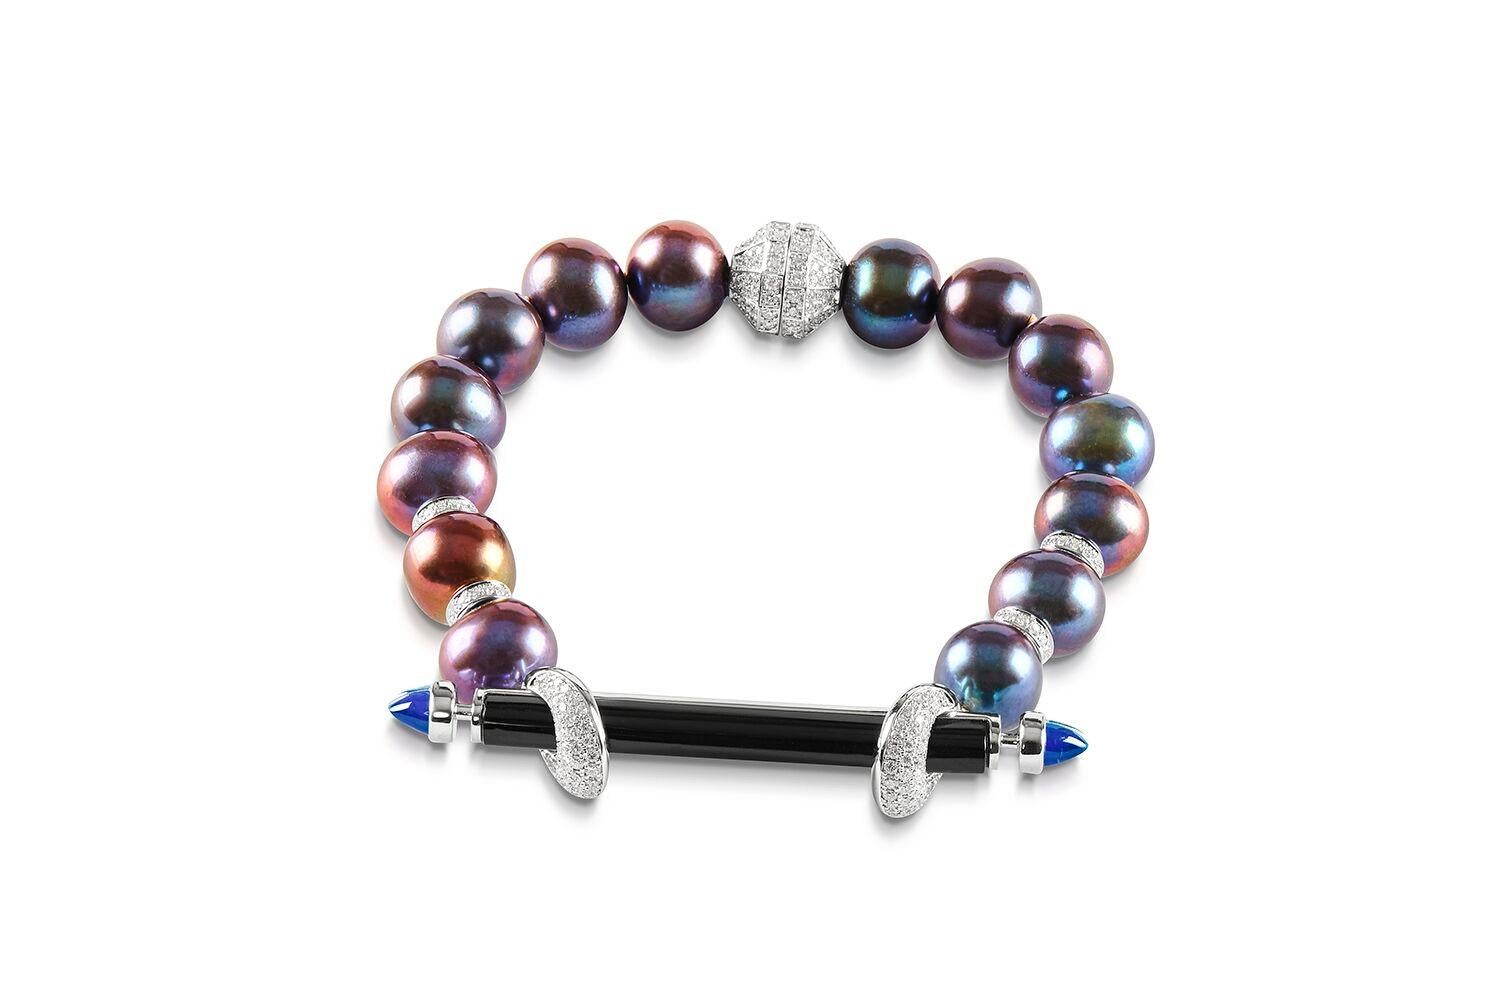 ANANYA CHAKRA BRACELET SET WITH ONYX, TOPAZ, PEARLS AND DIAMONDS


Set in 18K White gold


Total diamond weight: 1.50 ct
Color: F-G
Clarity: VVS1

Total cabochon topaz : 0.59 ct

Black freshwater pearls
Diameter - 50 mm